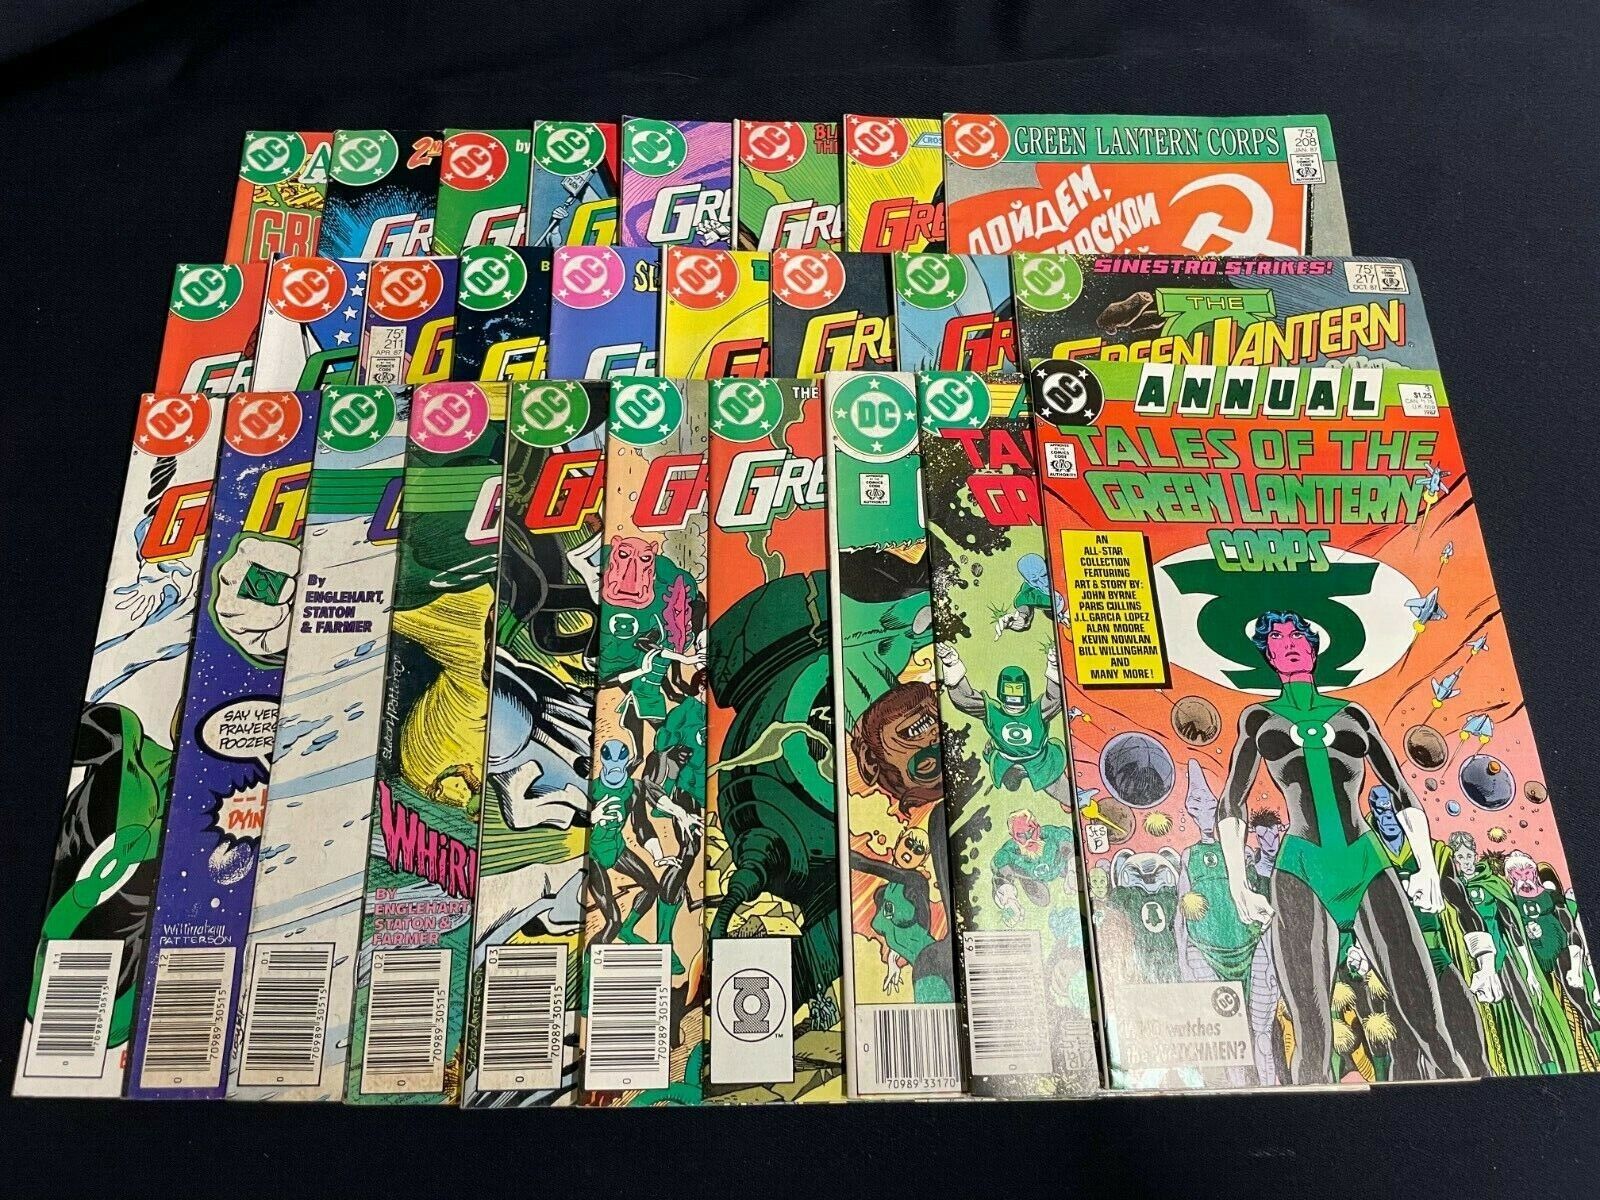 The Green Lantern Corps 200-224 miss 201 Tales of the GL Corps Ann 1-3, 27 books